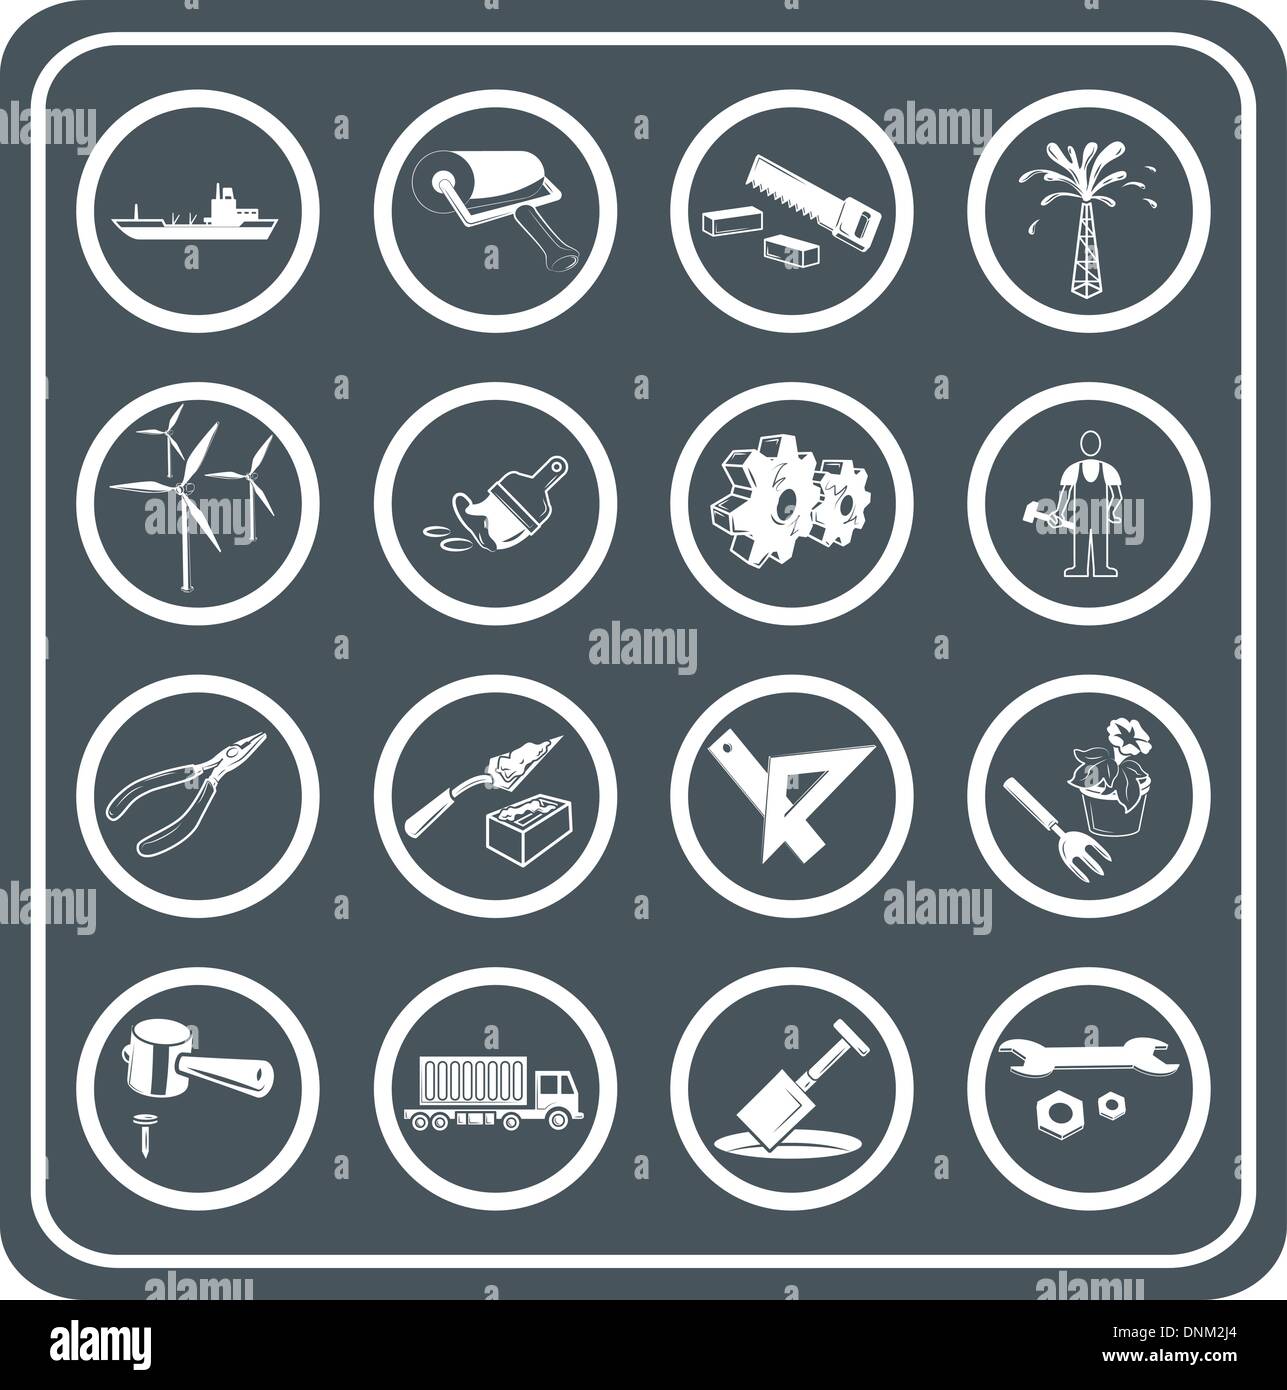 Tools and industry icon set Stock Vector